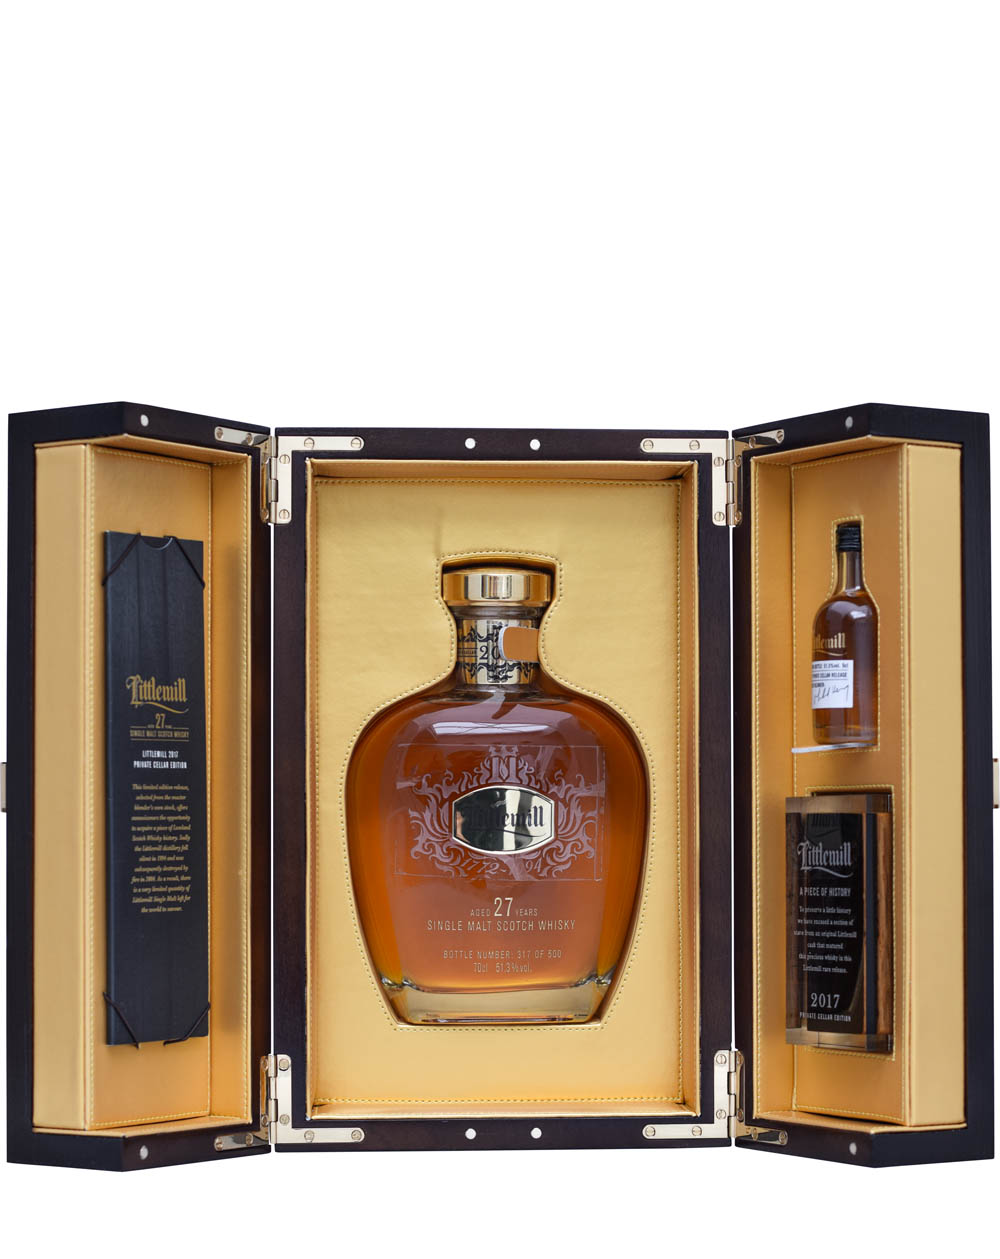 Littlemill Private Cellar Edition 2017 (27 Years Old) - Box Musthave Malts MHM